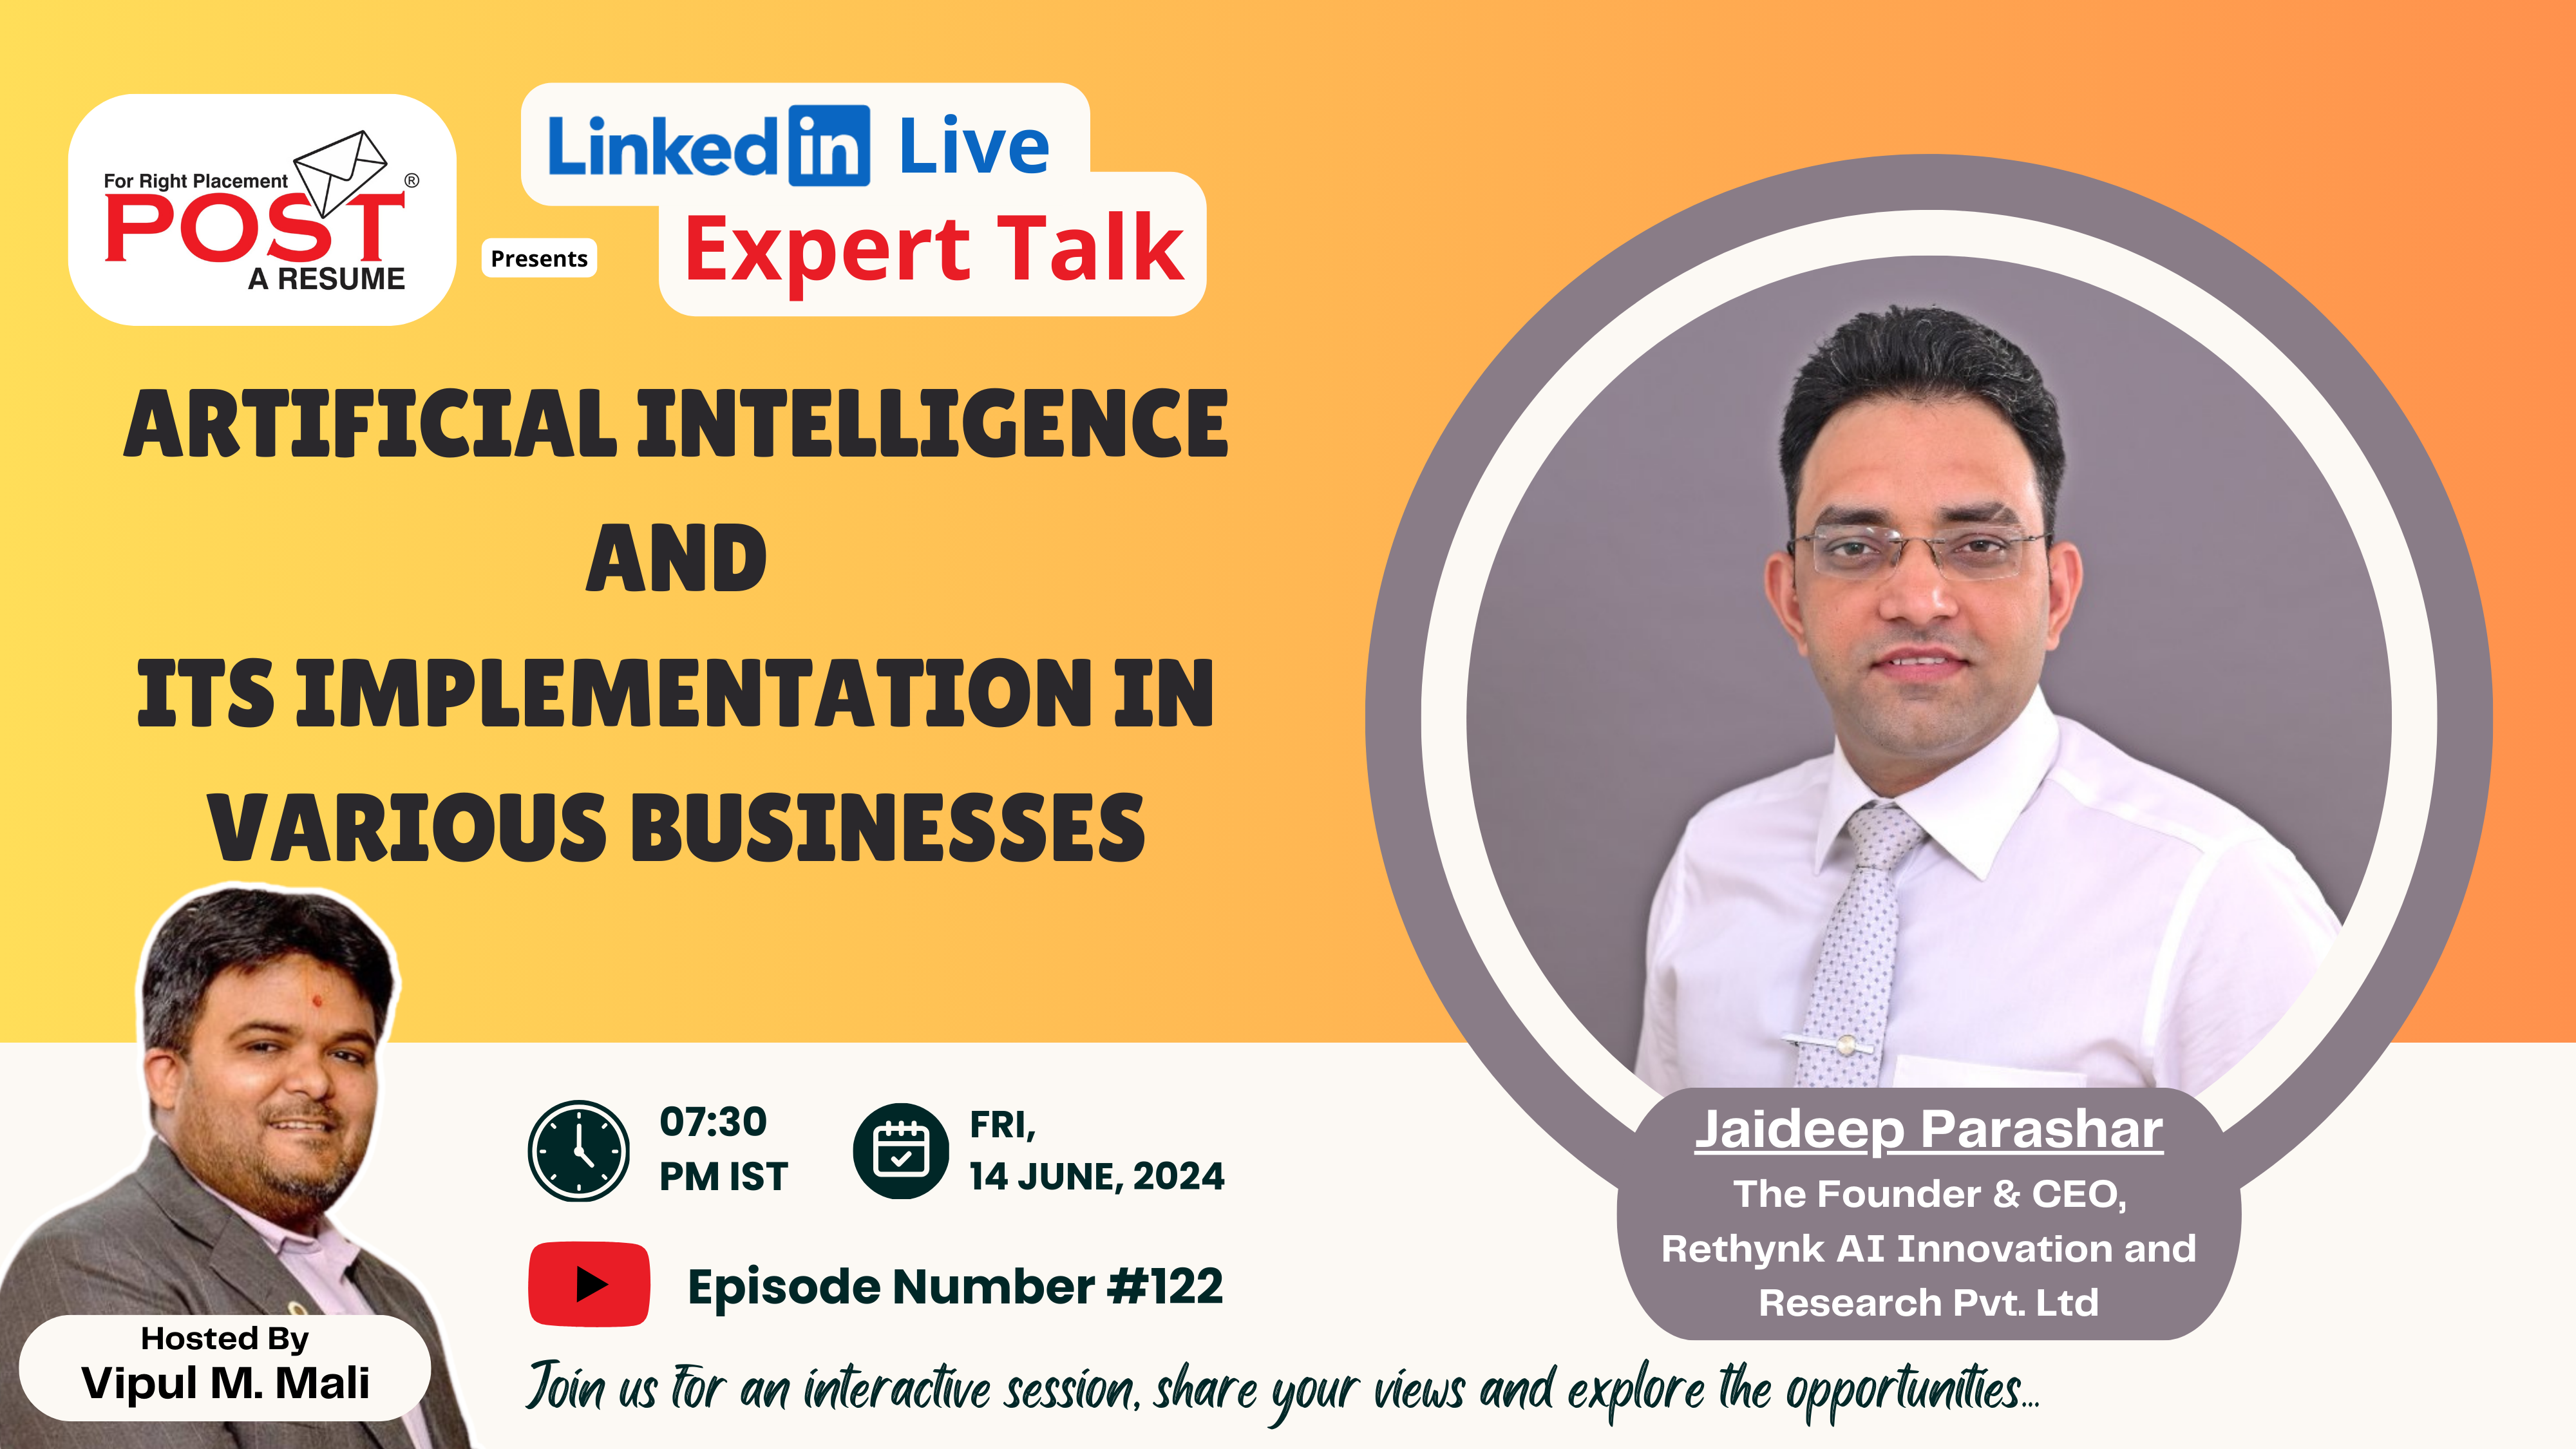 Expert Talk Ep. 122 with Jaideep Parashar on Artificial Intelligence and Its Implementation in Various Businesses